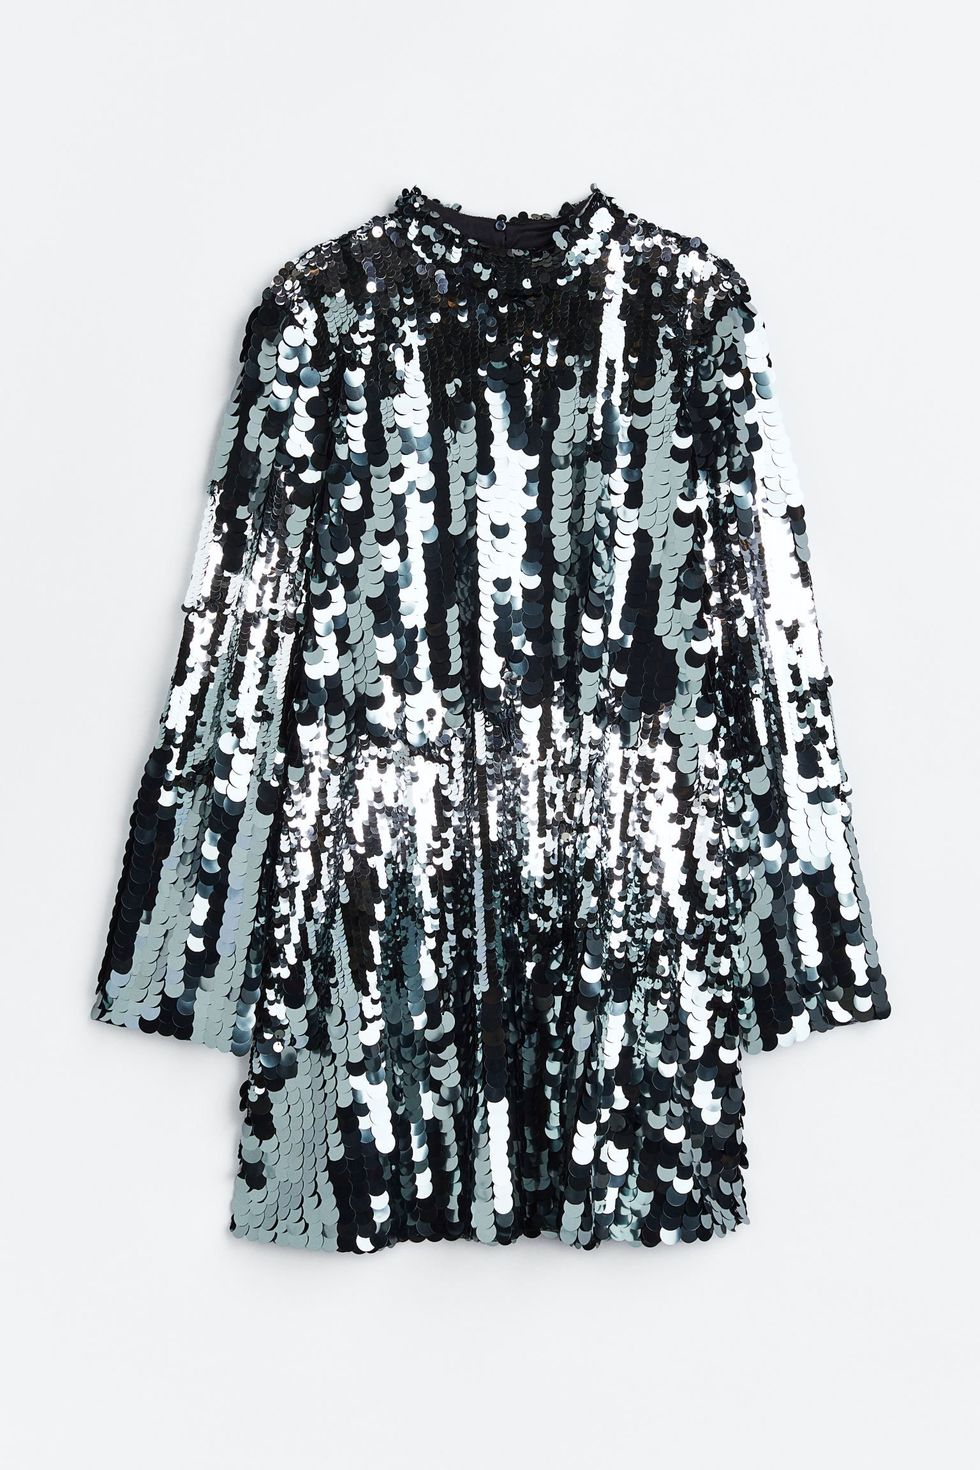 Silver Sequined party dress